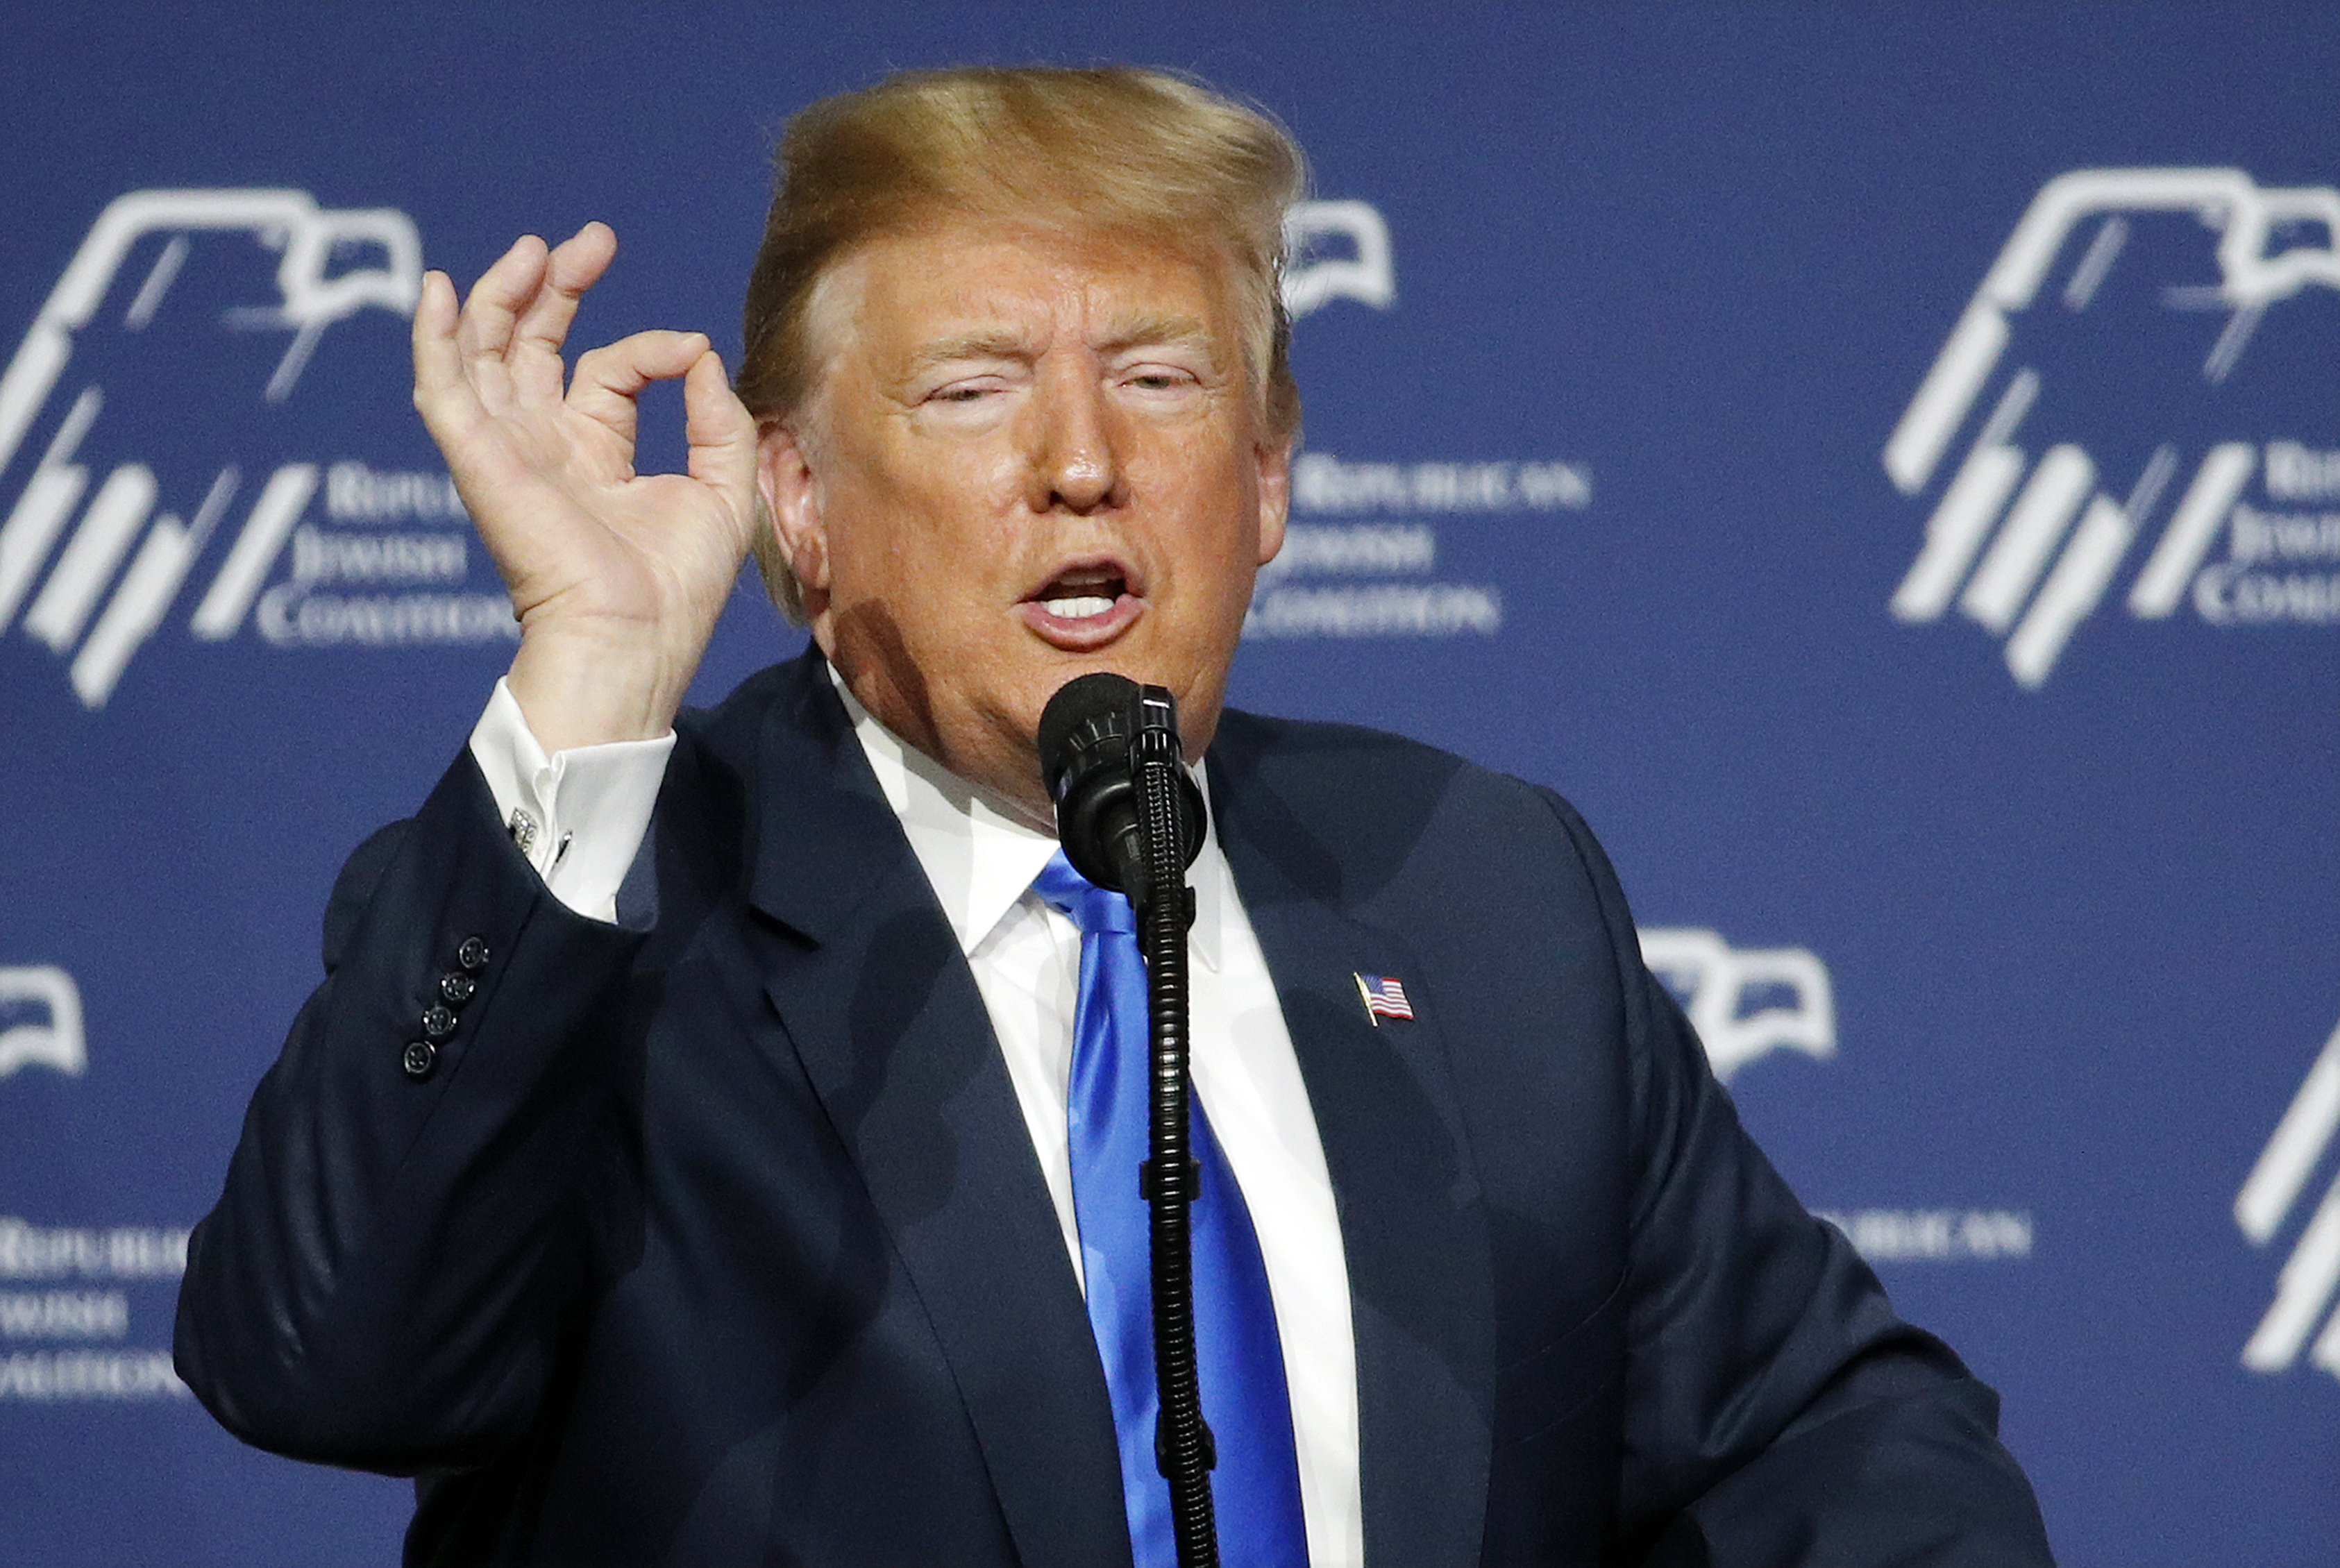 In this April 6, 2019, photo, President Donald Trump speaks at an annual meeting of the Republican Jewish Coalition in Las Vegas. Trump took a victory lap after special counsel Robert Mueller concluded his Russia investigation, but it may have been premature. The scramble to frame the investigation’s findings in the best political light is sure to be renewed in coming days when Mueller’s report is expected to be released in redacted form. (AP Photo/John Locher)